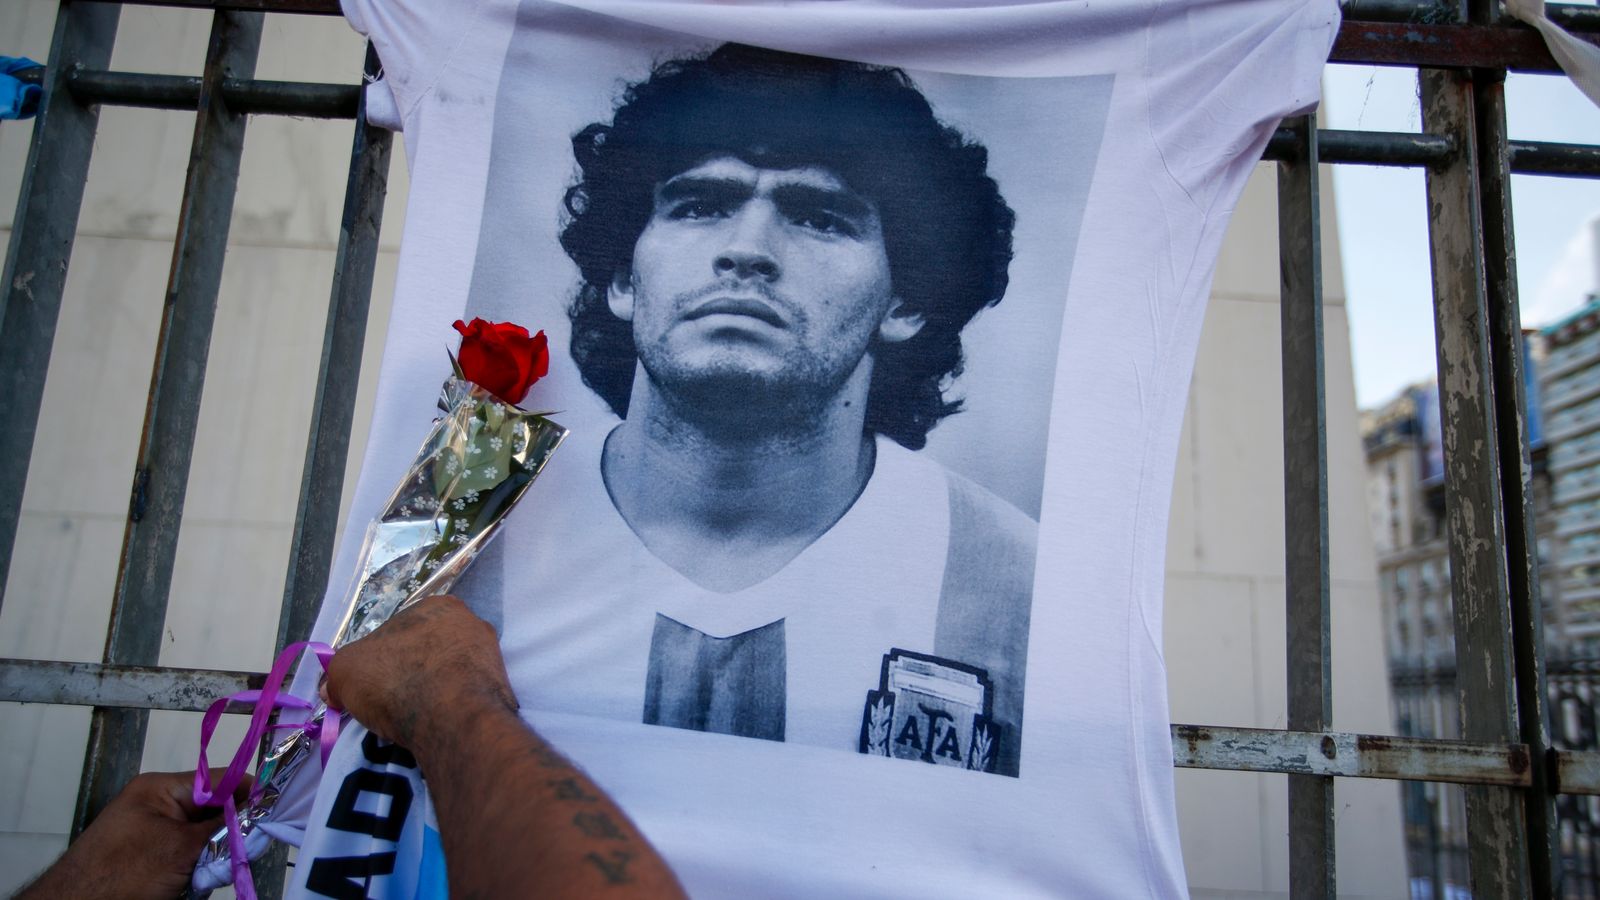 Diego Maradona: Eight doctors and nurses who cared for Argentina legend face homicide charges after his death